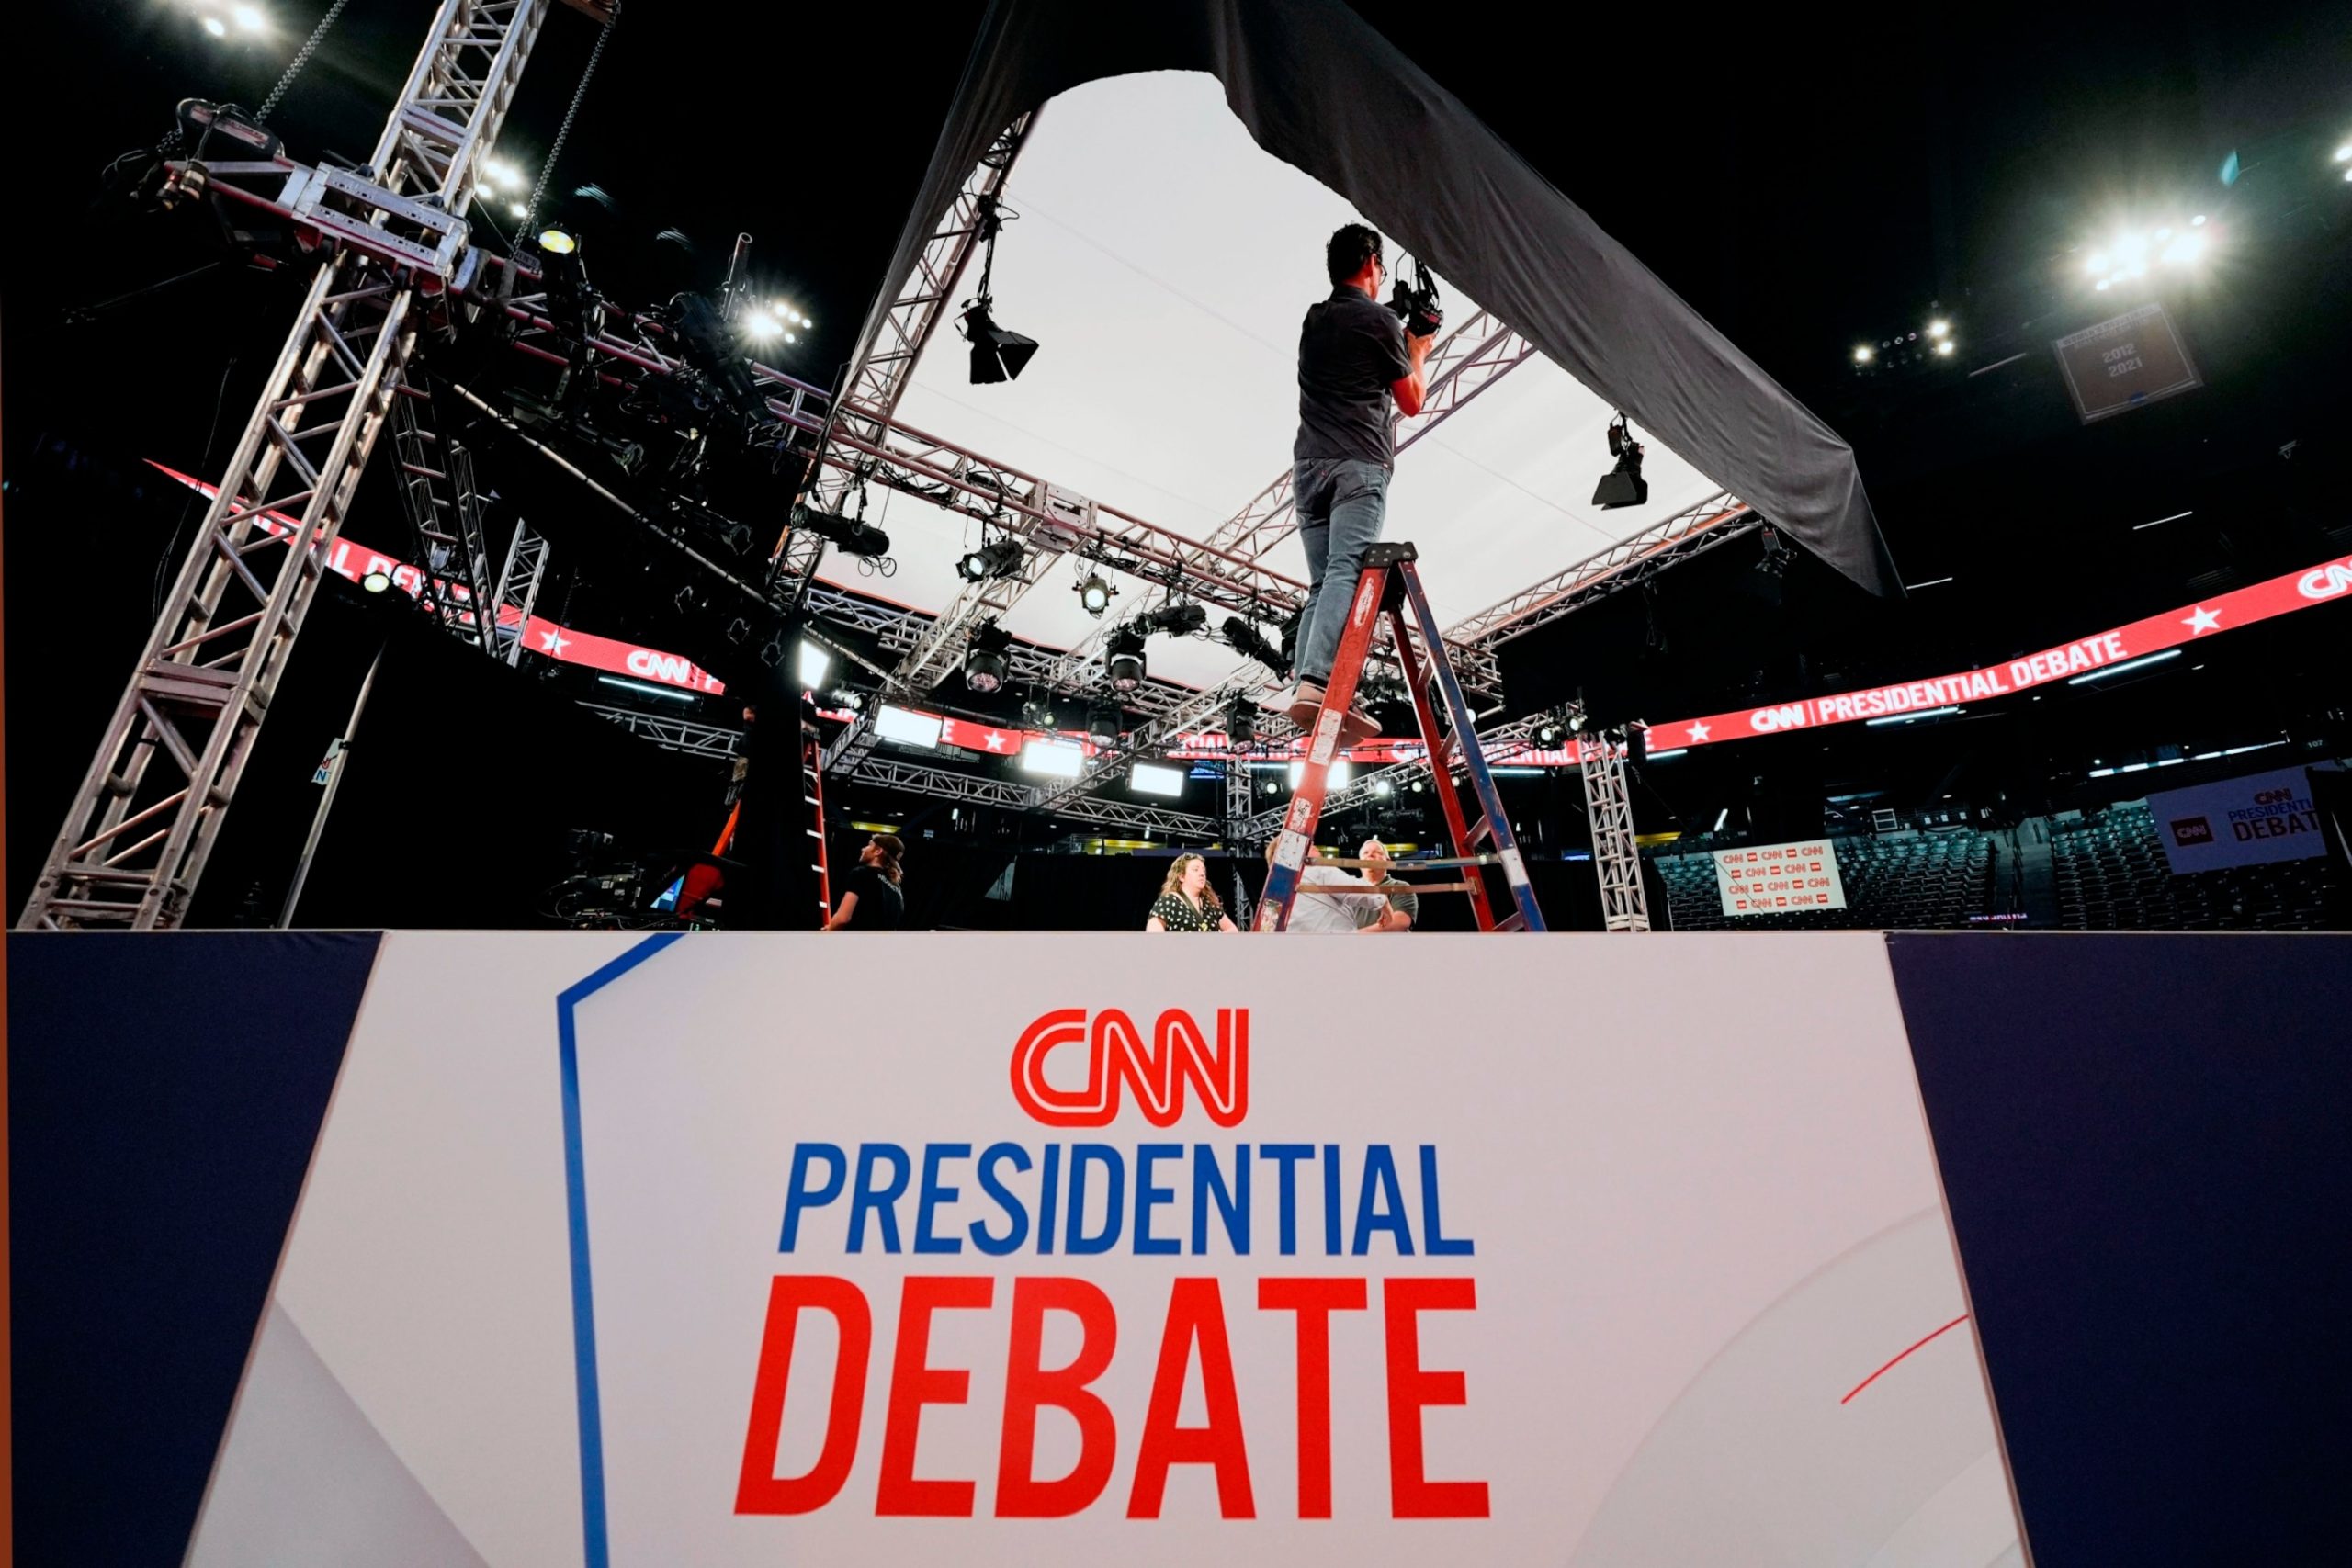 The potential impact of the earliest presidential debate on the election